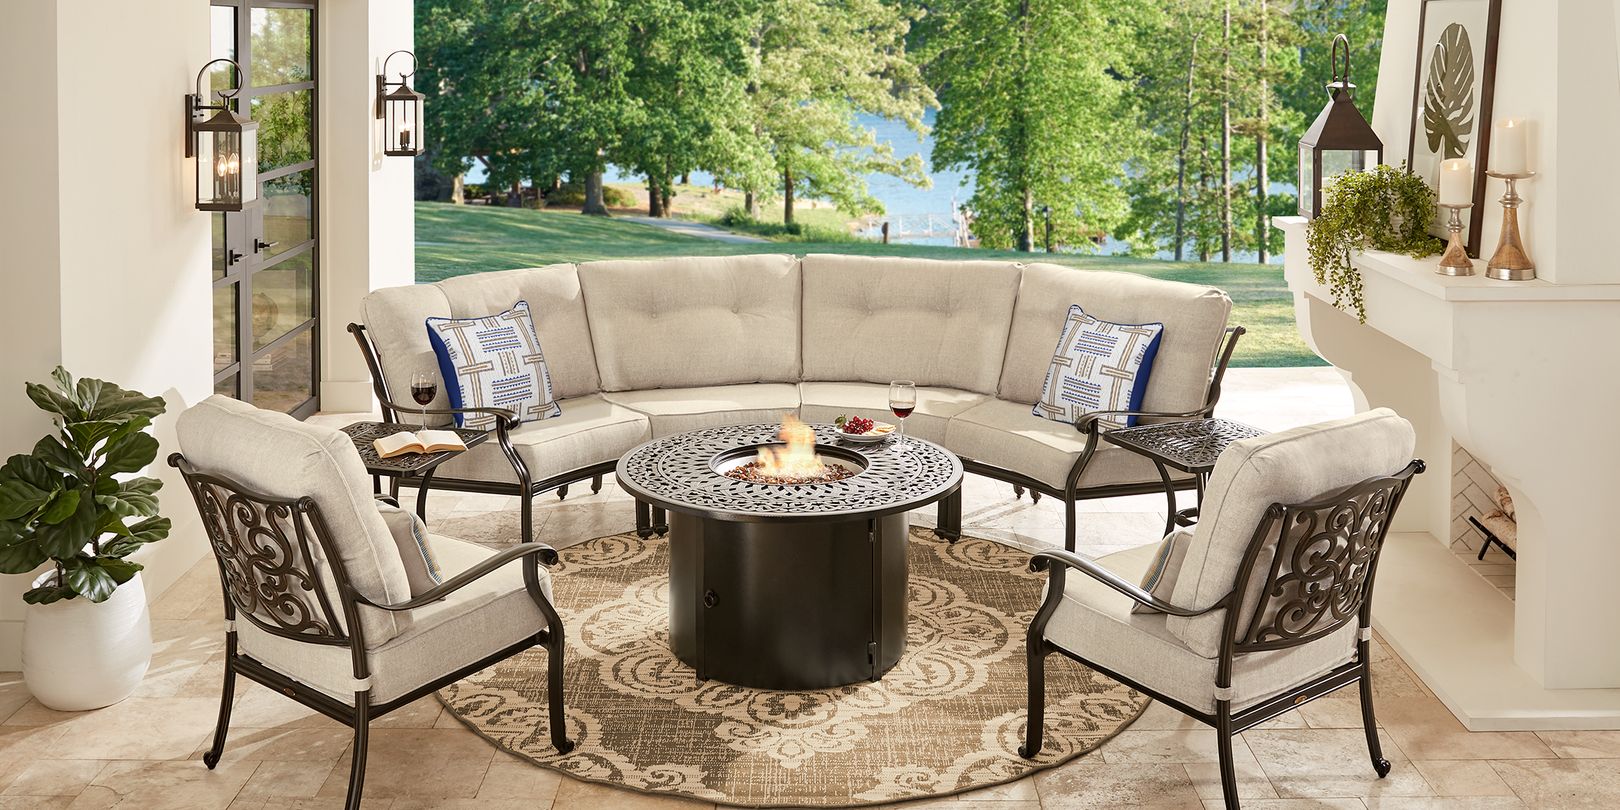 Photo of patio seating set with curved sectional, a fire pit and chairs